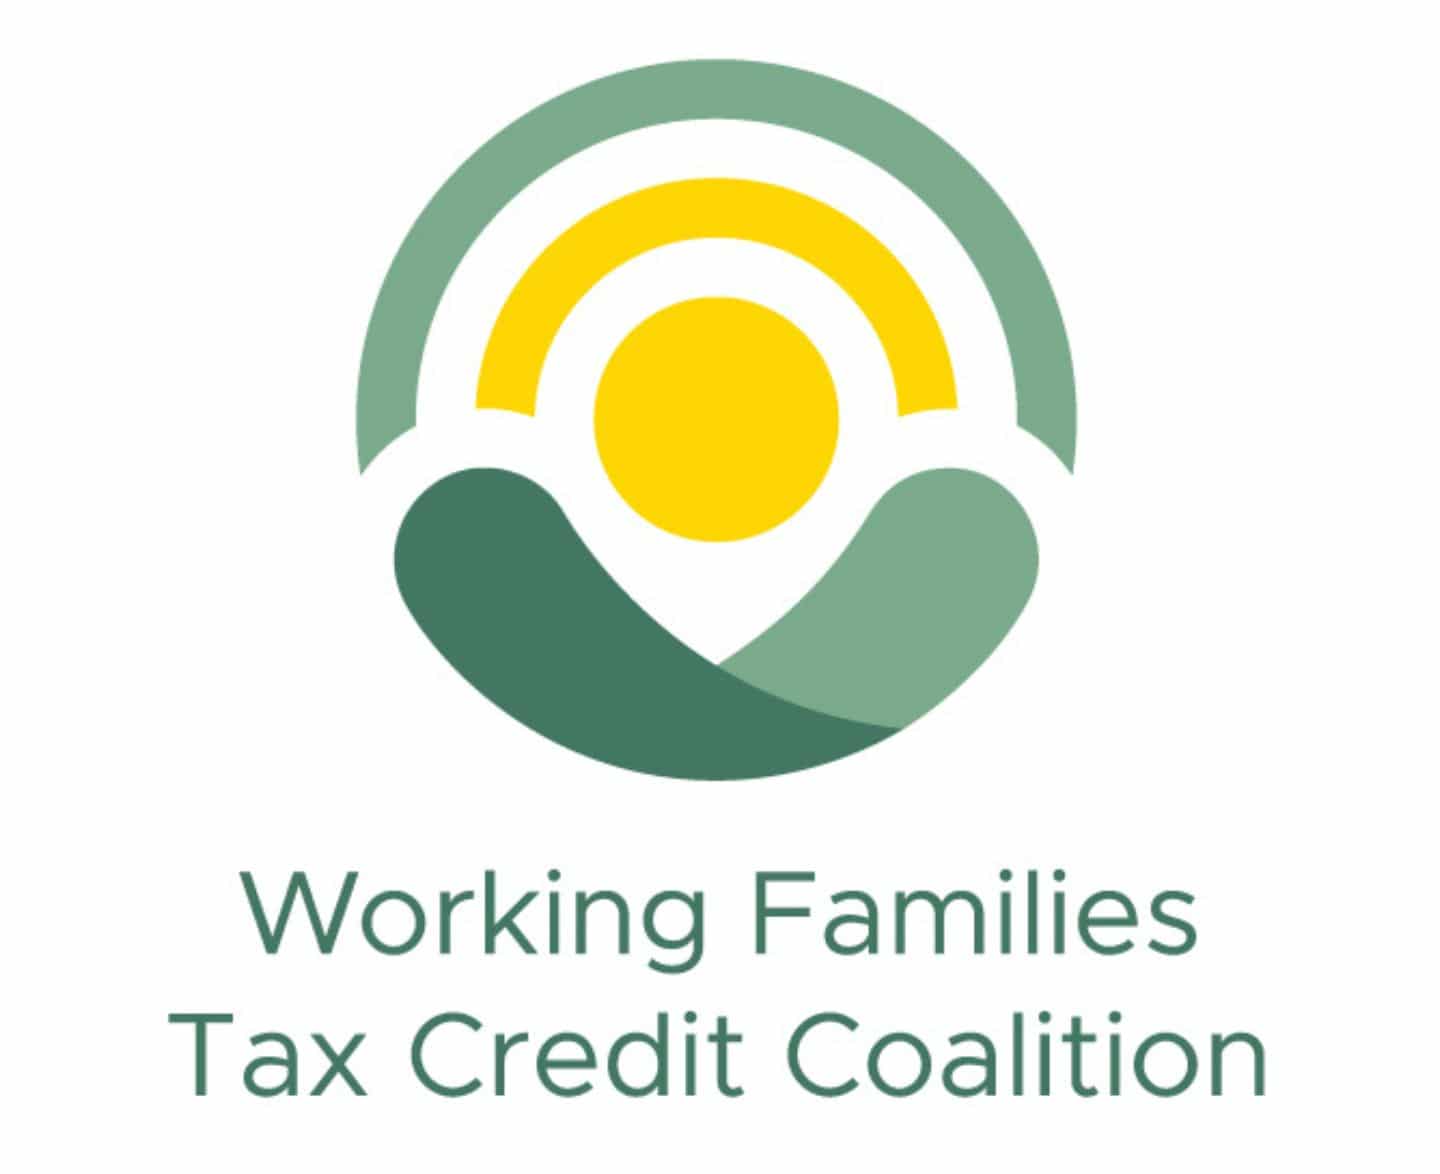 Working Families Tax Credit Coalition logo